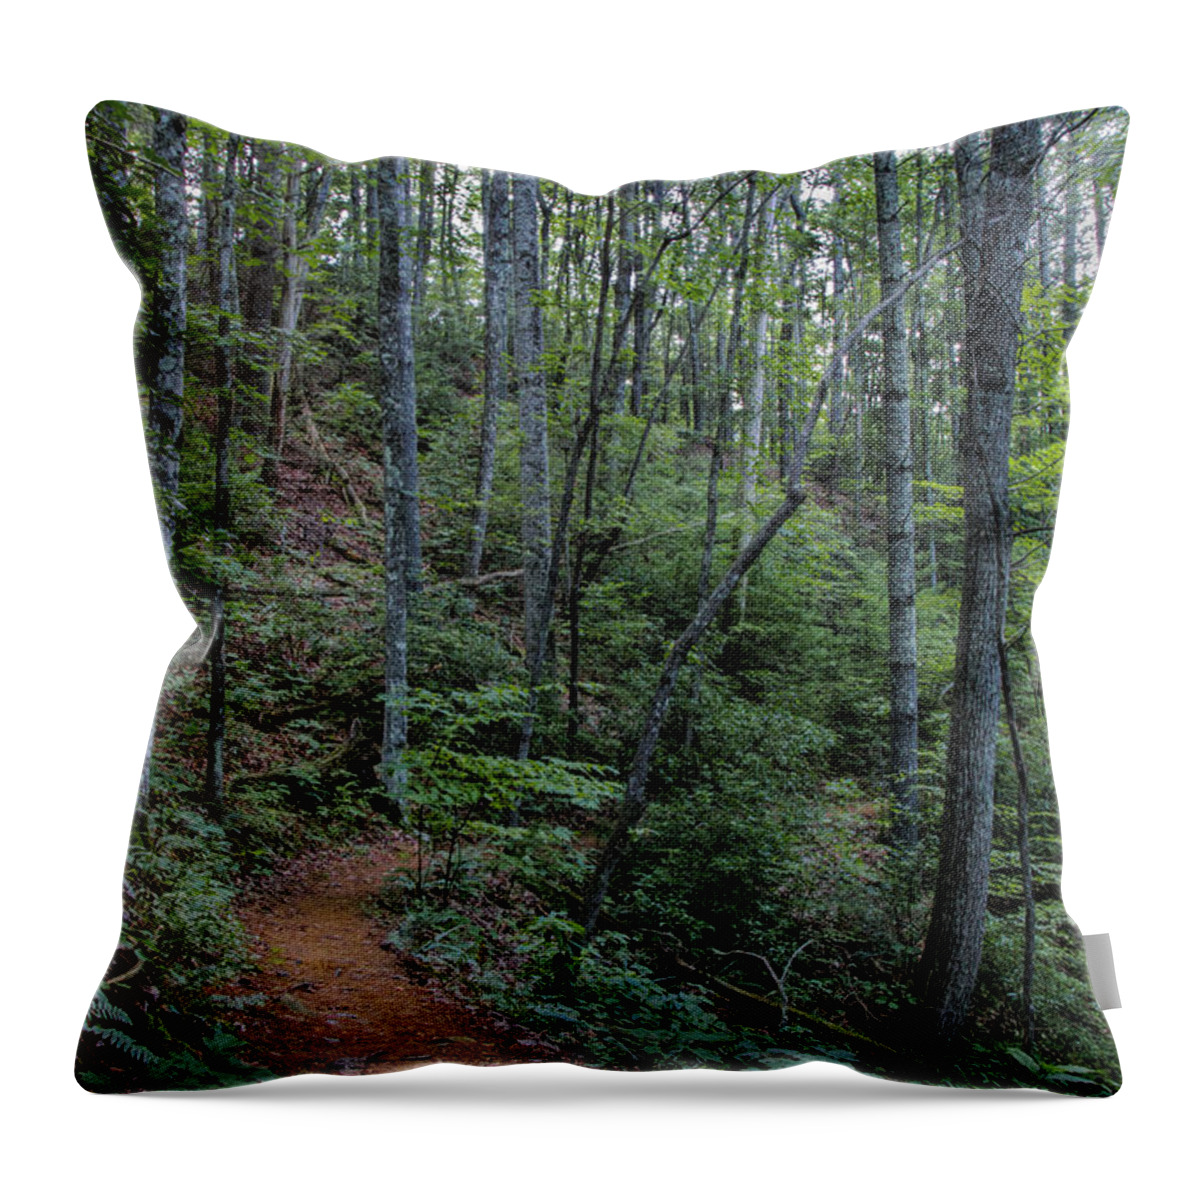 Stanly Gap Trail Throw Pillow featuring the photograph Stanly Gap Trail by Barbara Bowen